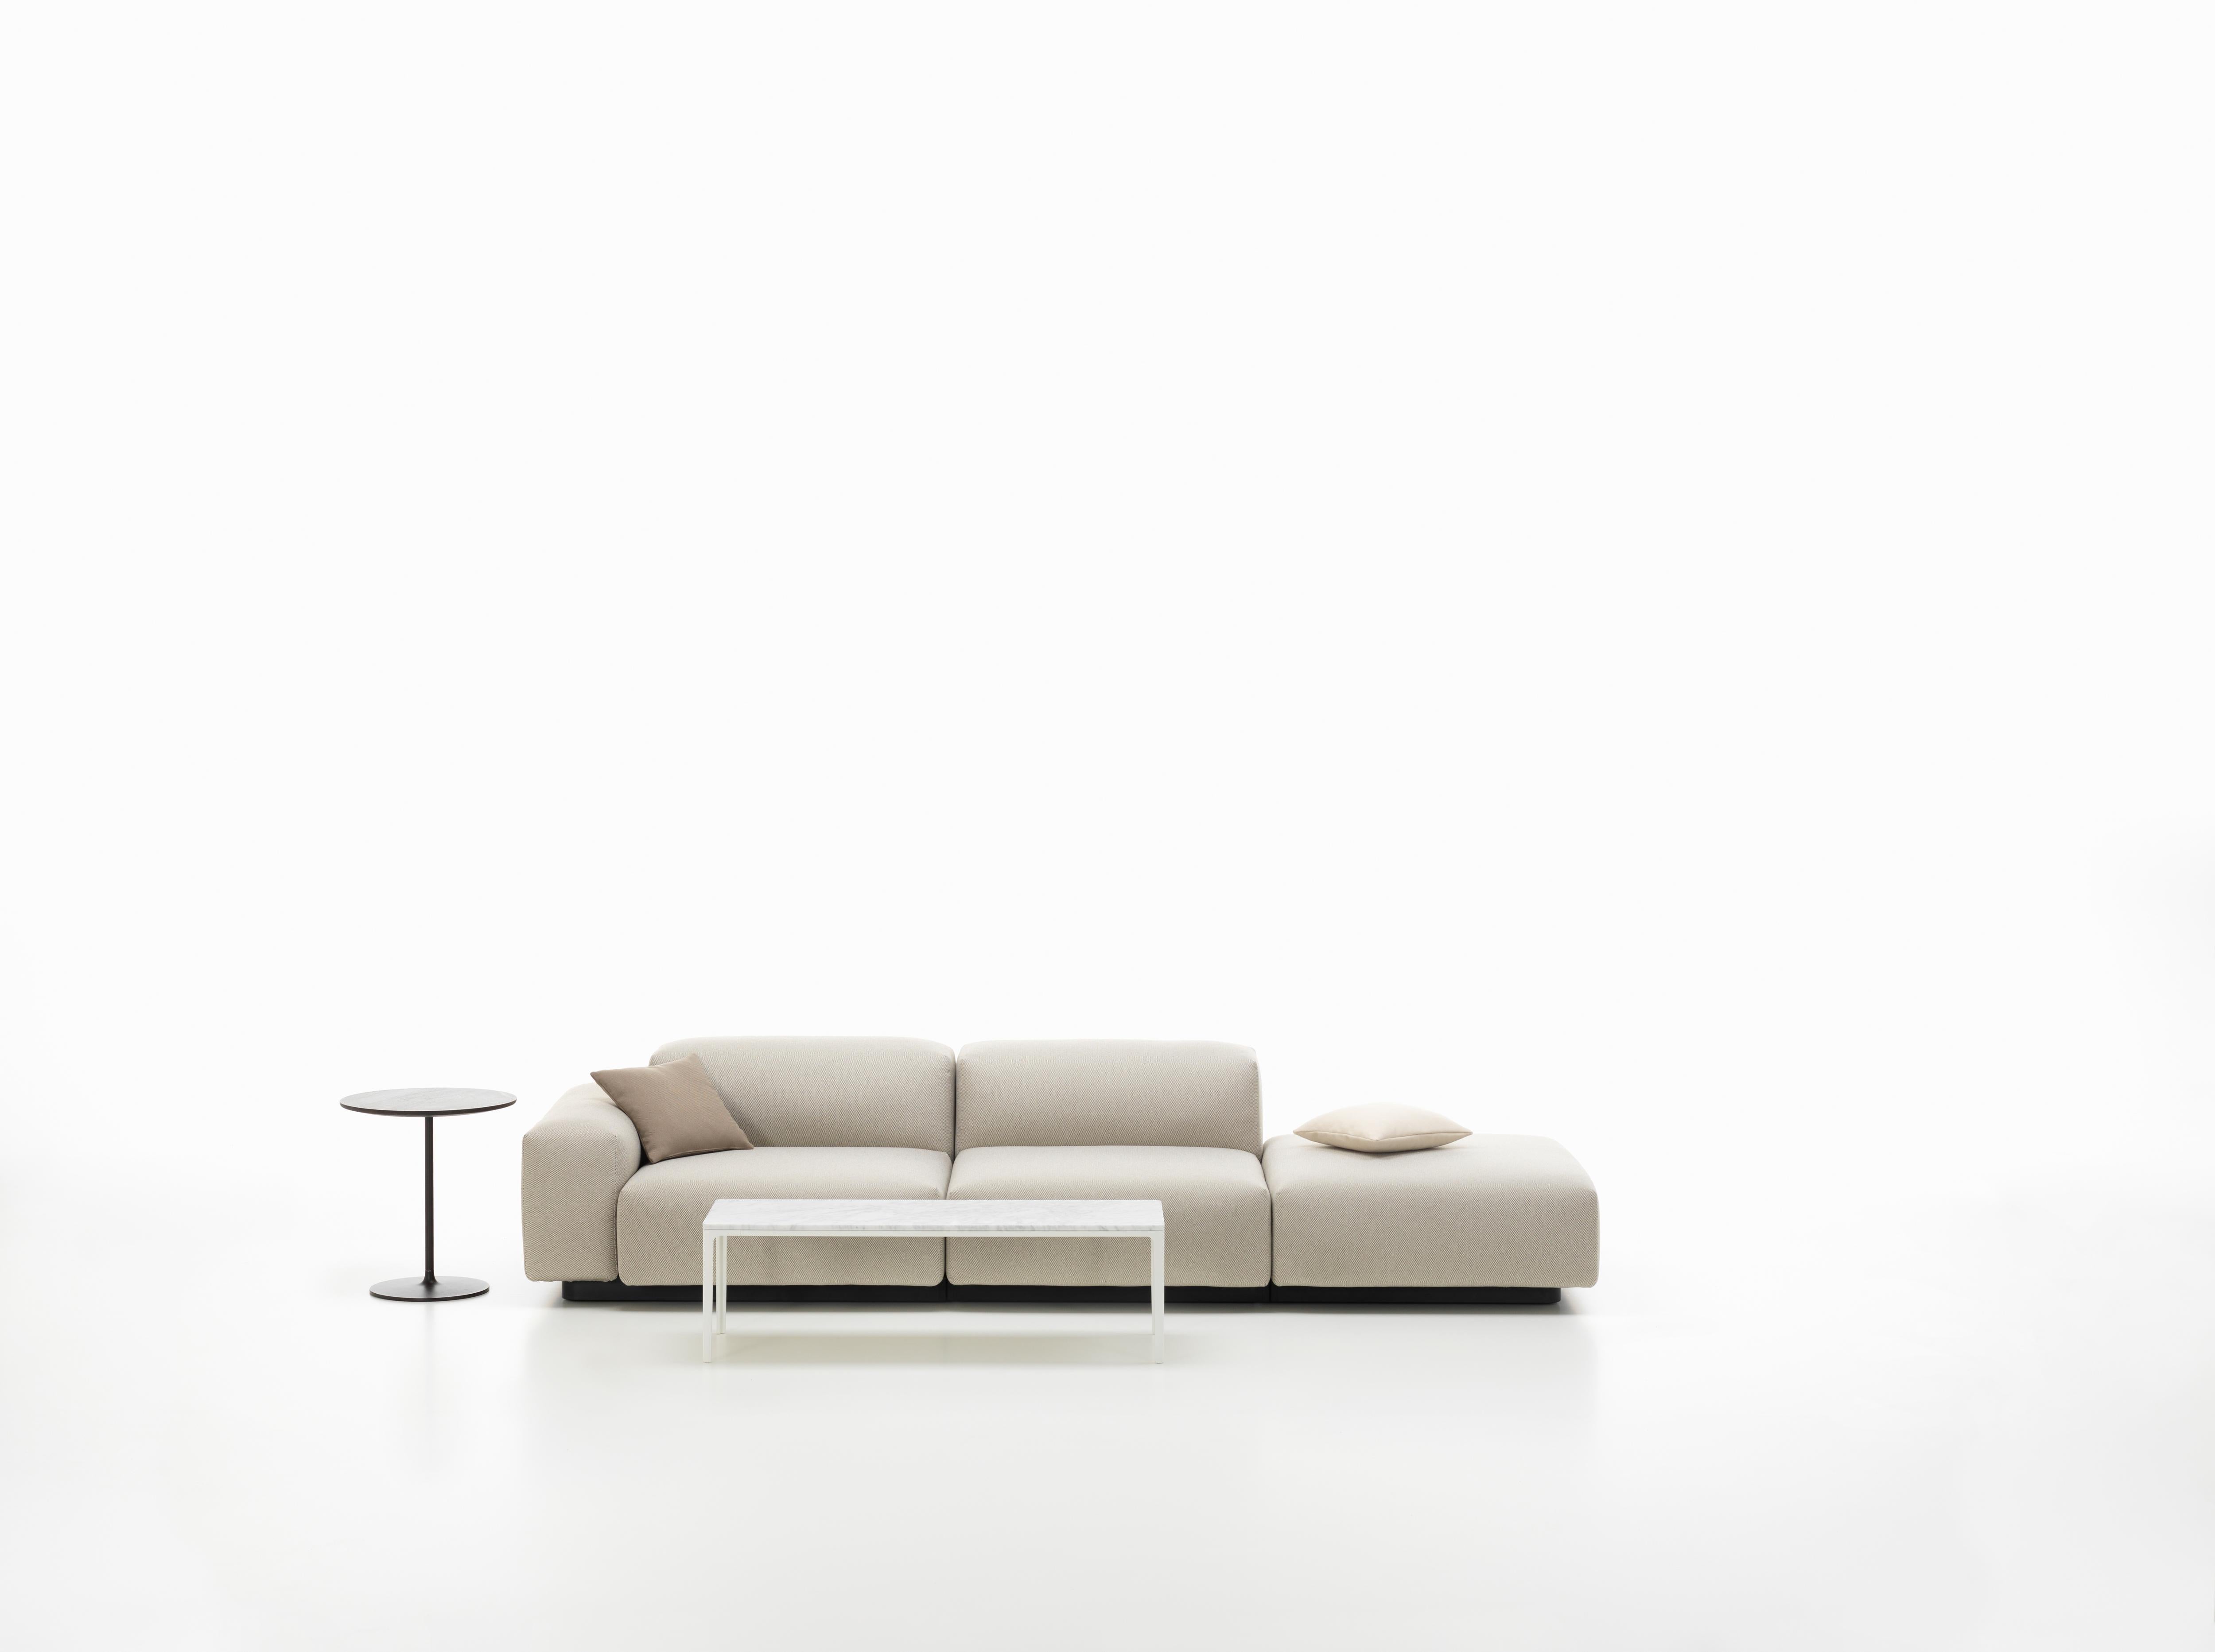 These items are only available in the United States.

The Soft Modular sofa is Jasper Morrison‘s updated interpretation of what has become a modern classic: the low-slung modular sofa with a decidedly horizontal emphasis. Uniting carefully